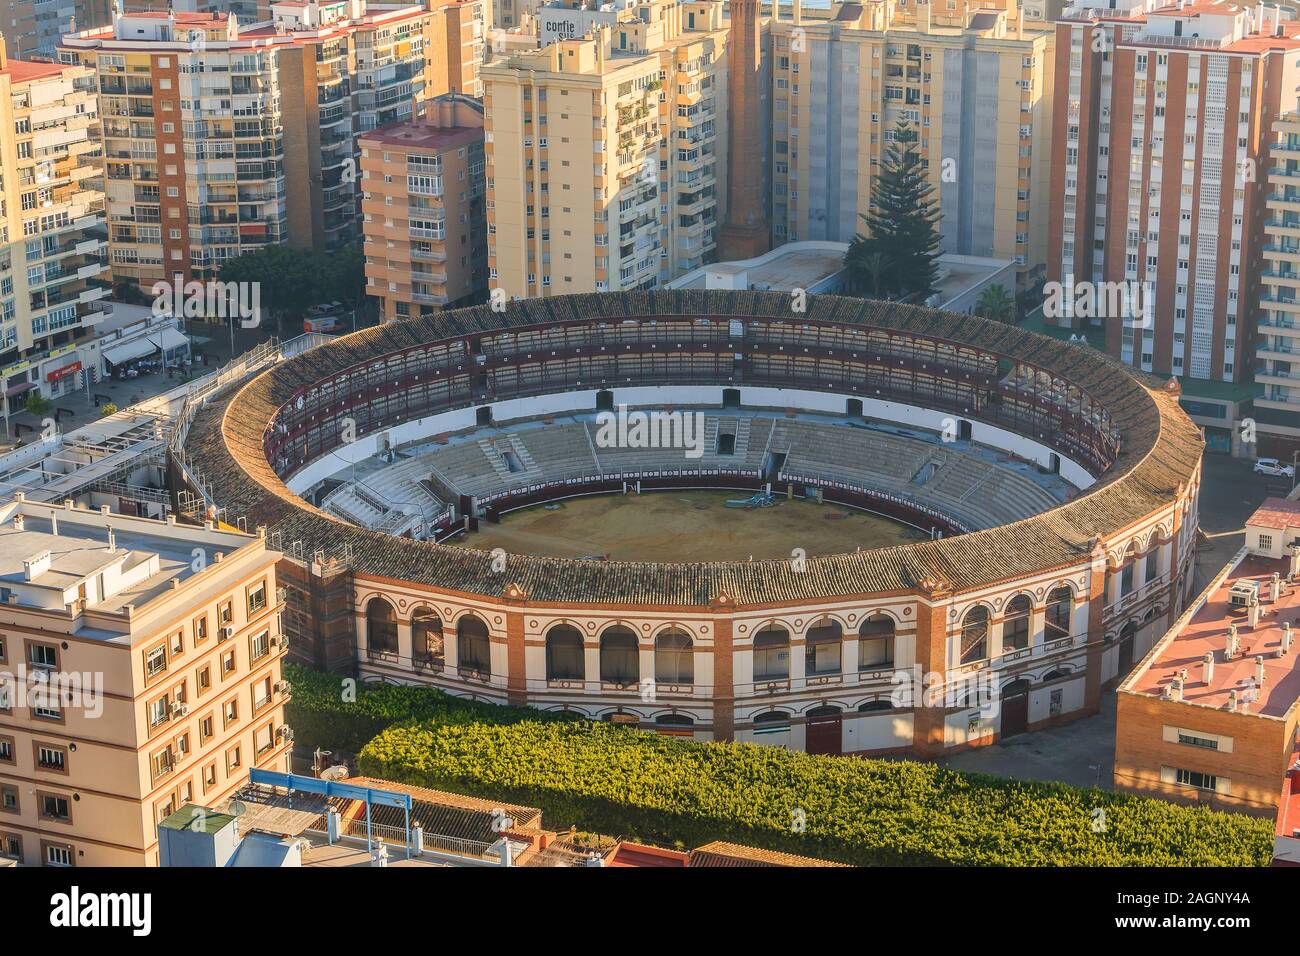 Bullring on the coast of Malaga. In the center of Malaga amid high-rise buildings with a view over the roofs over the city with sunshine Stock Photo